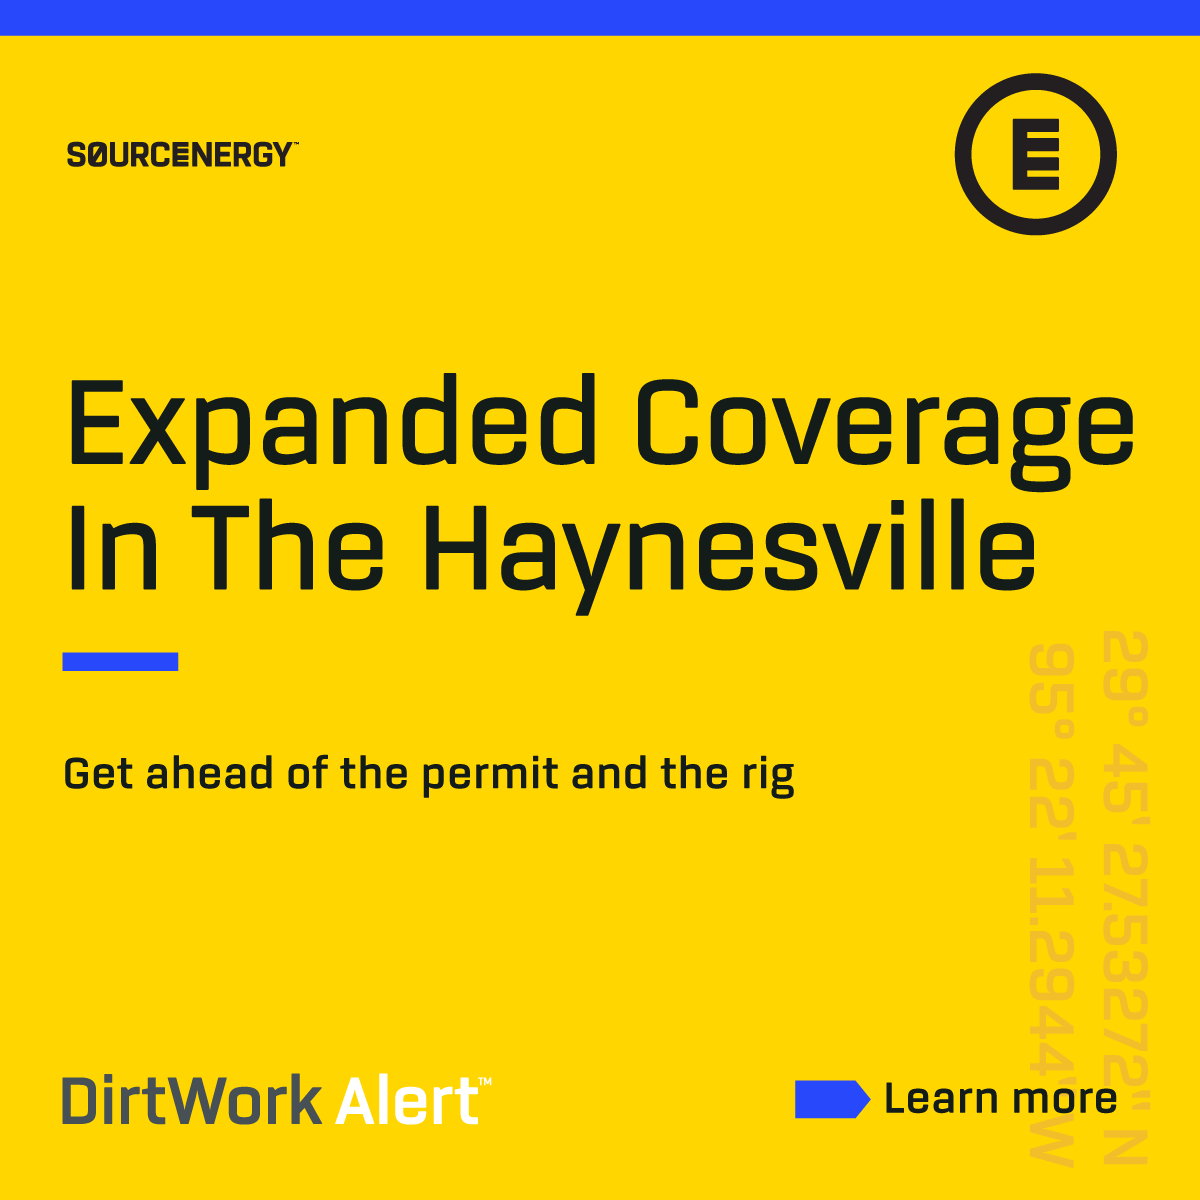 Into the Haynesville: New, Expanded Coverage